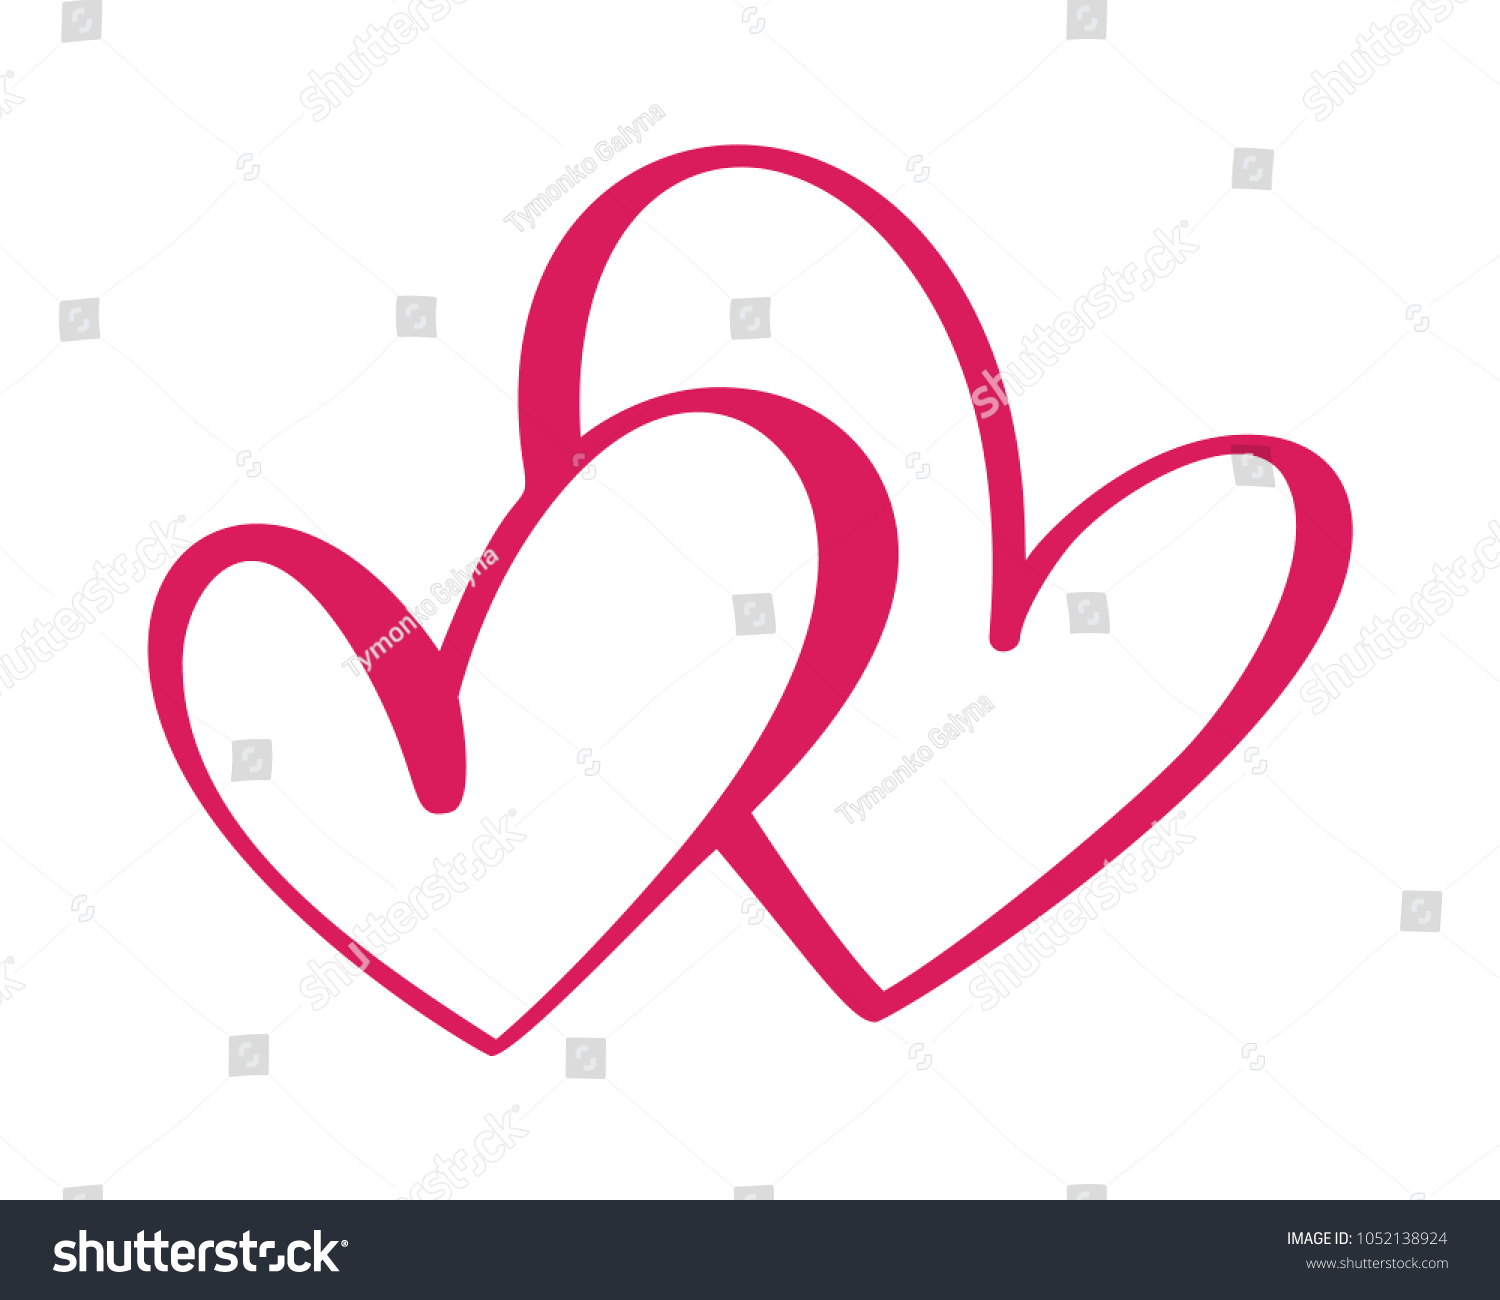 SVG of Heart two love sign. Icon on white background. Romantic symbol linked, join, passion and wedding. Template for t shirt, card, poster. Design flat element of valentine day. Vector illustration svg